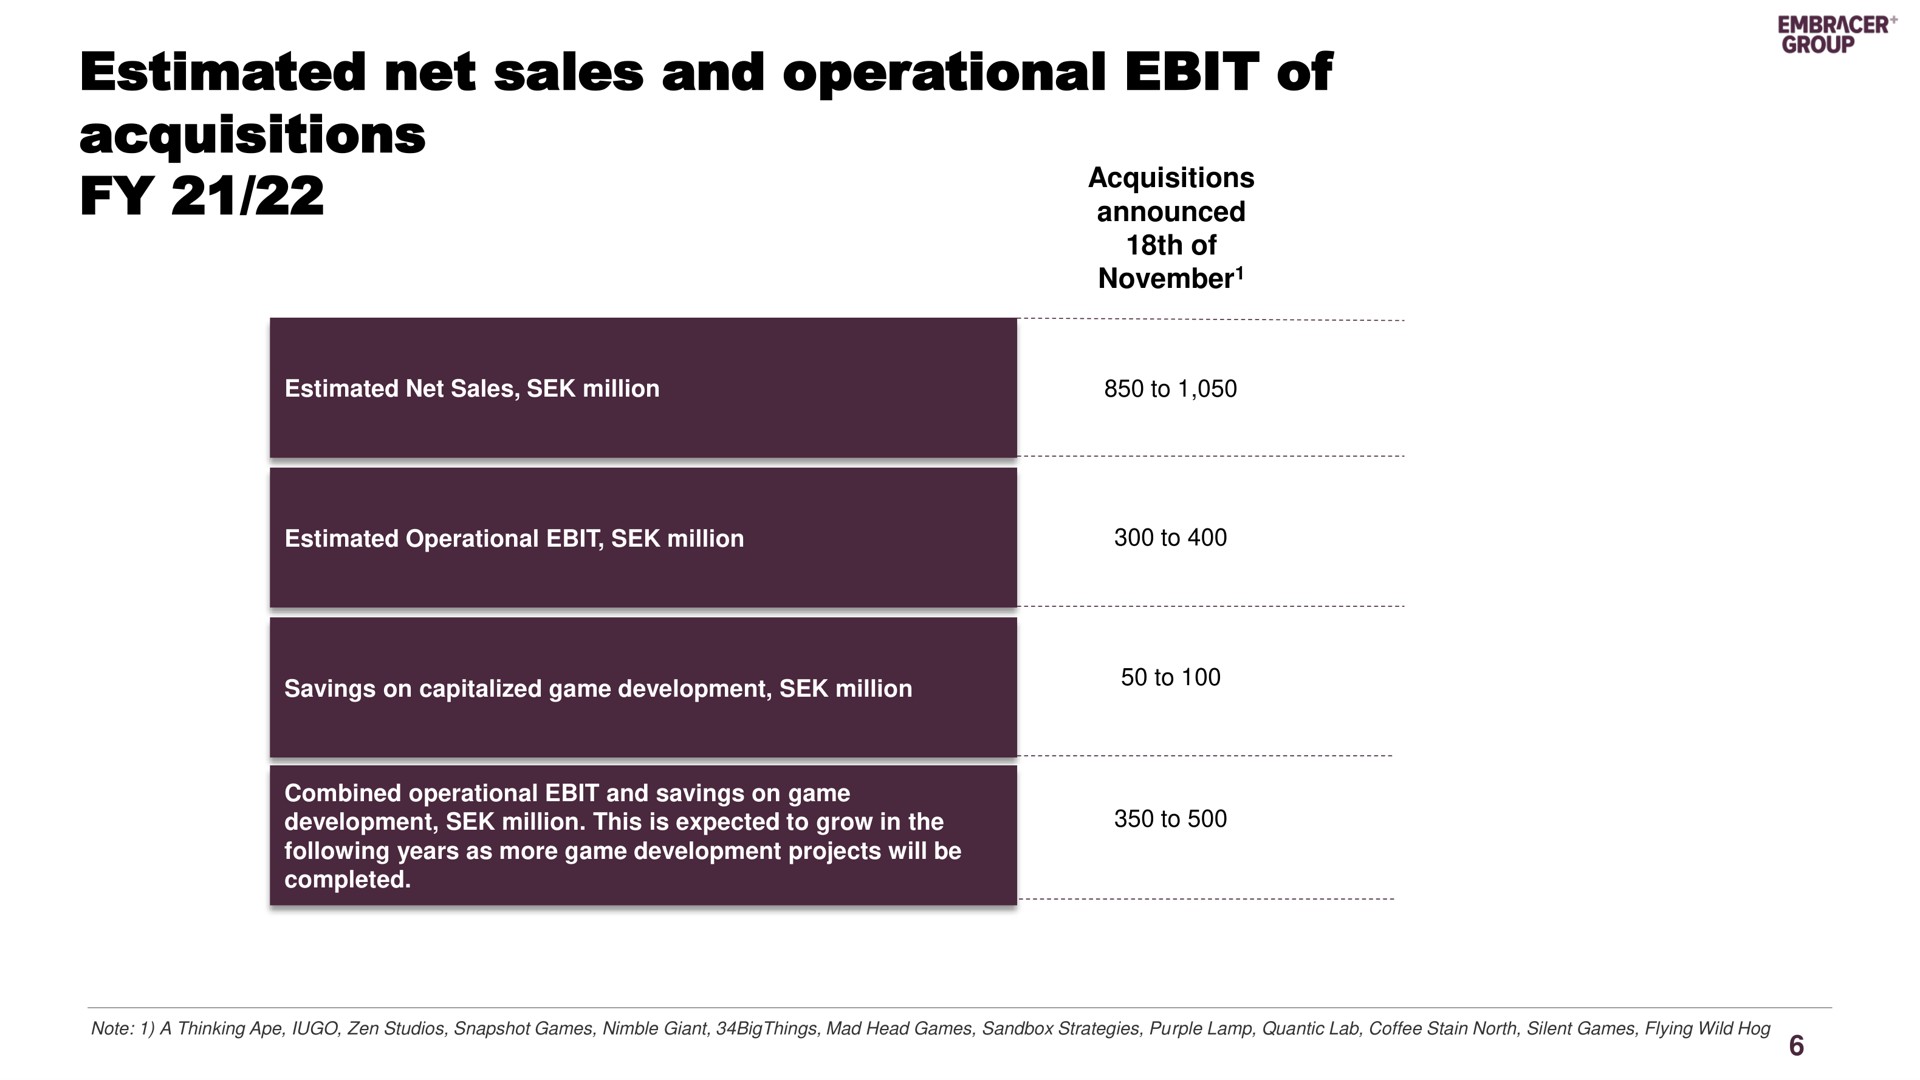 estimated net sales and operational of acquisitions | Embracer Group